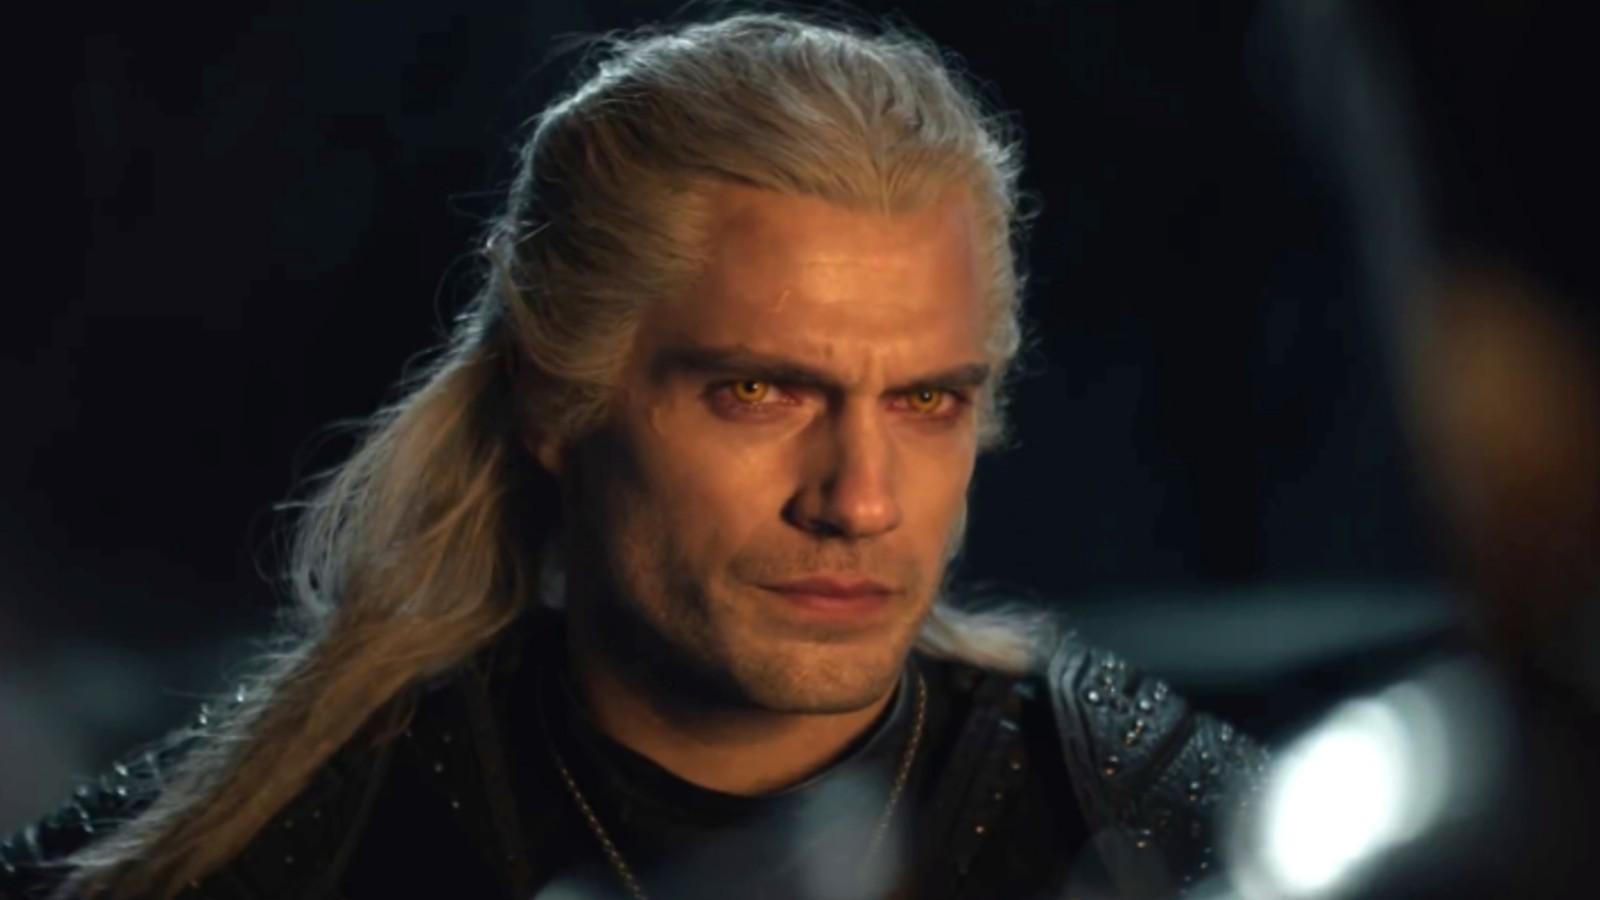 The Witcher season 3 poster unveiled